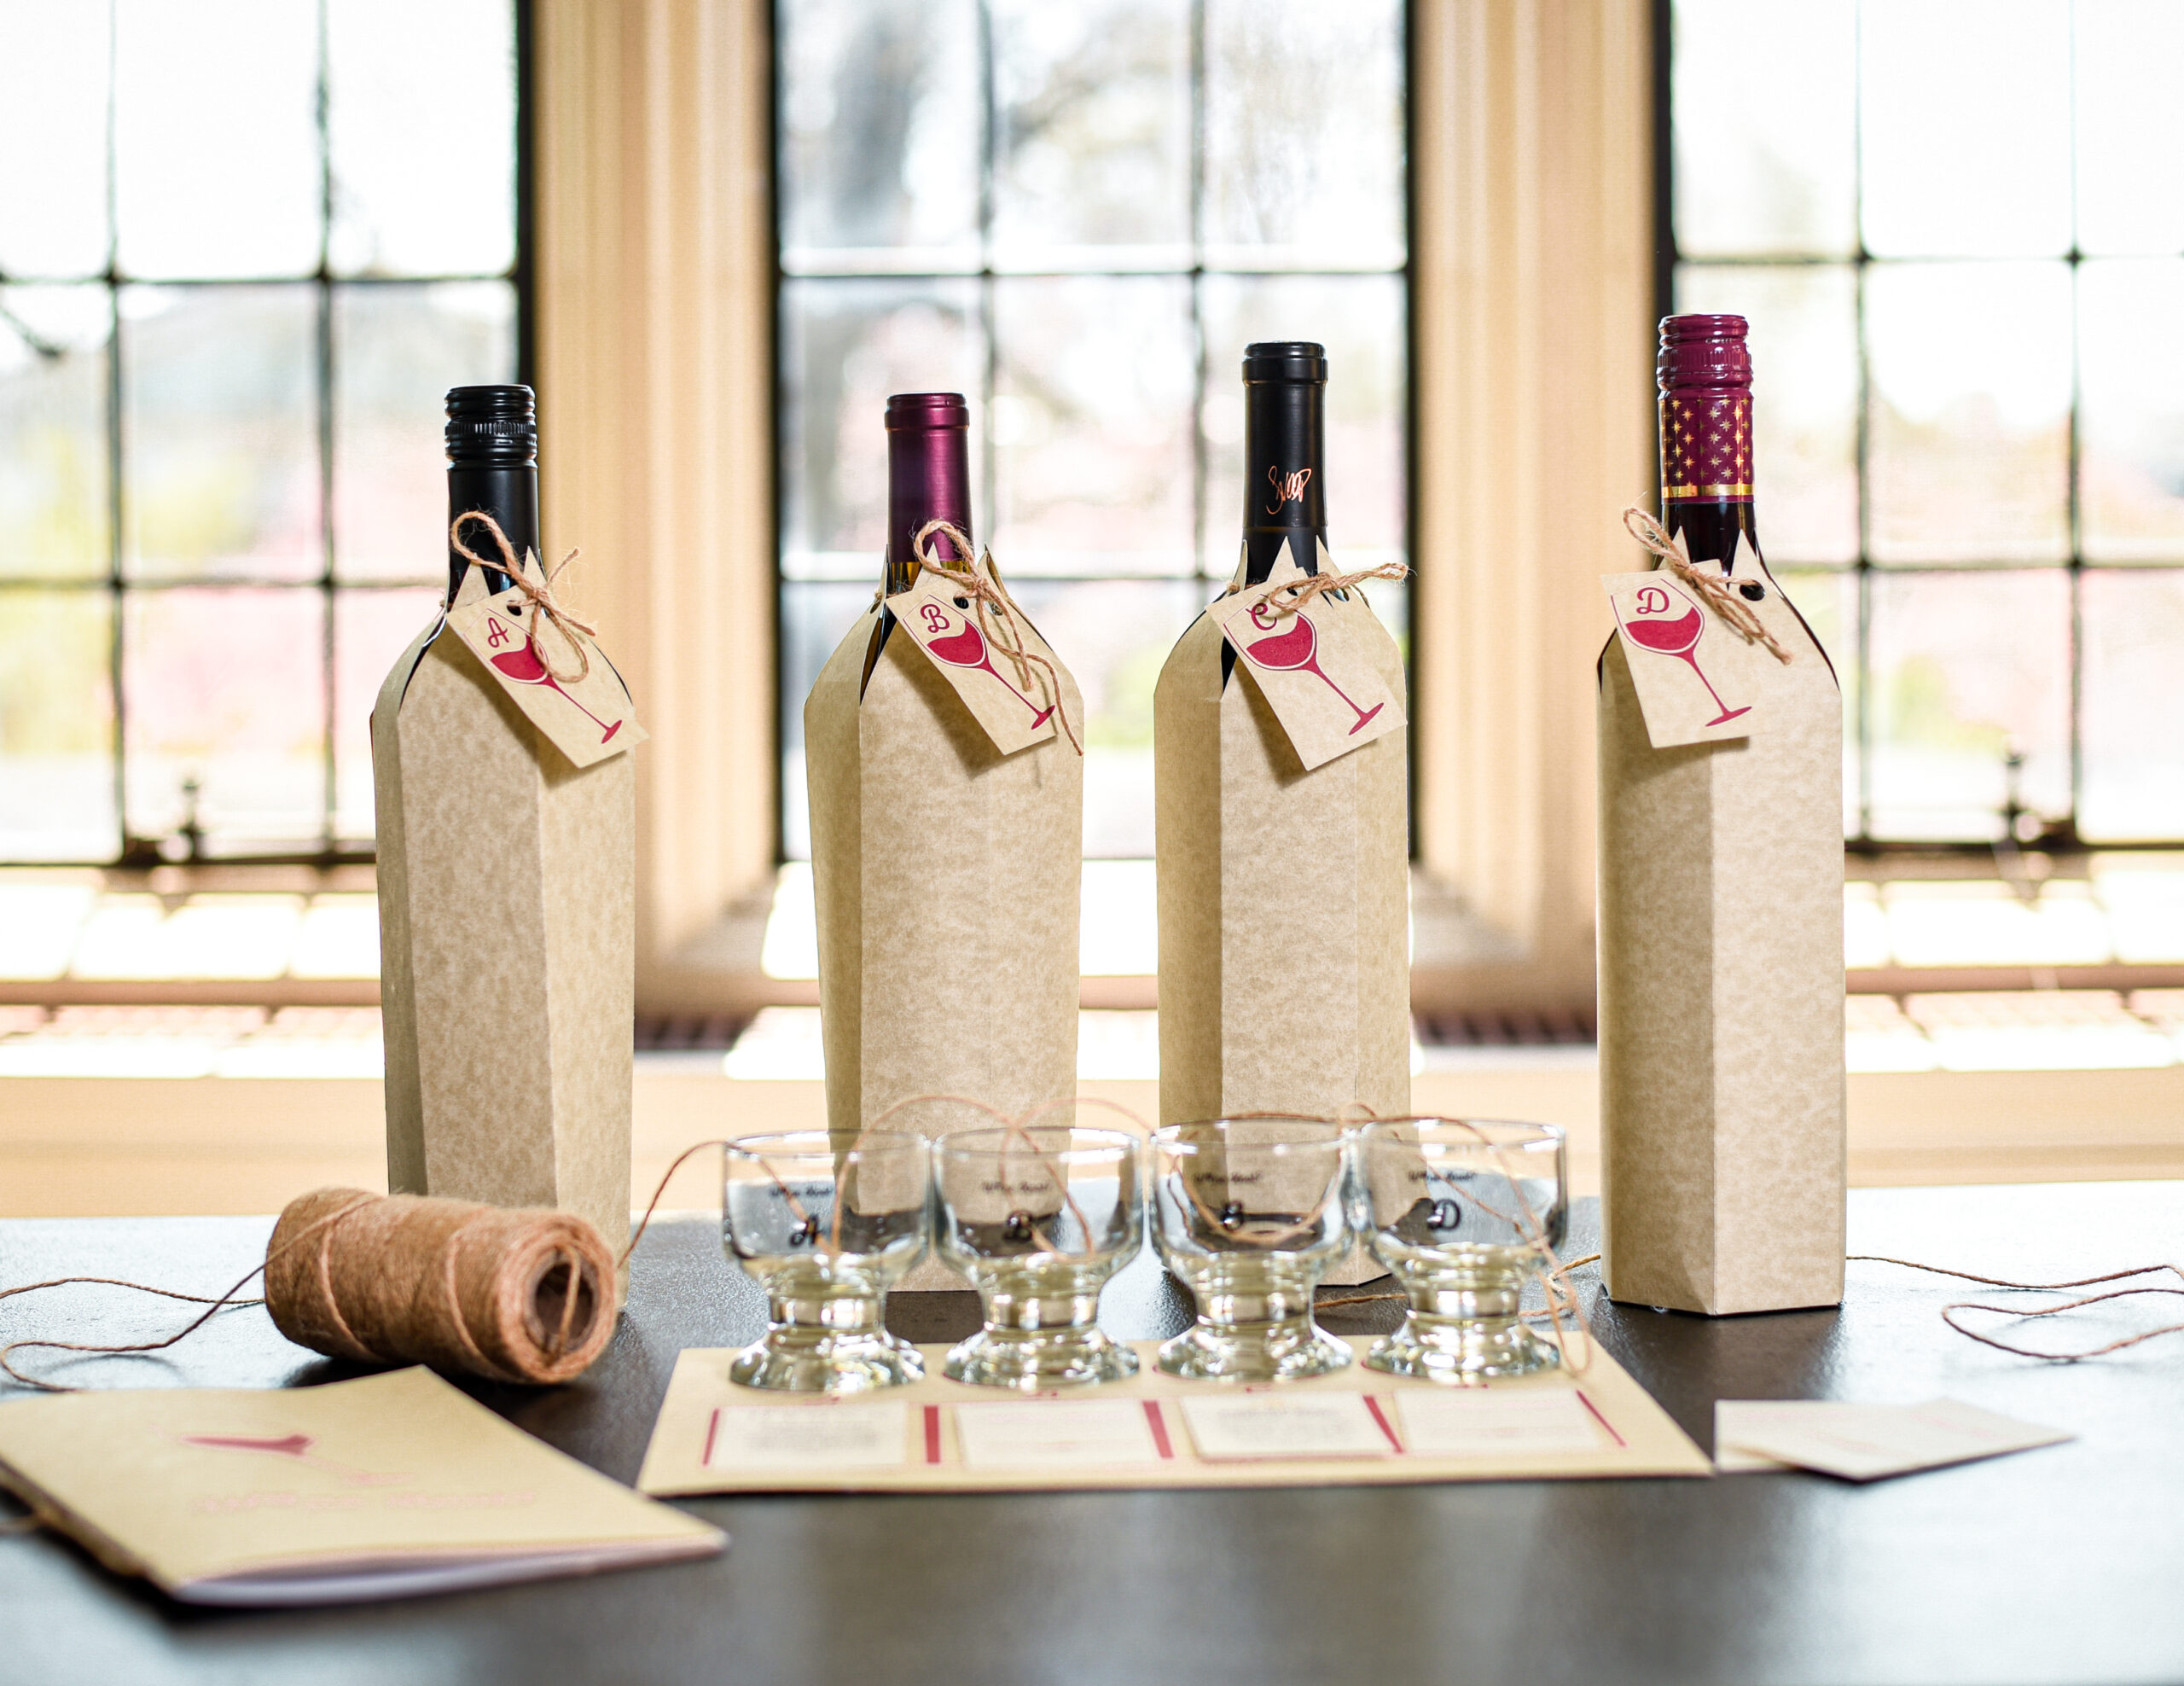 Four bottles of wine covered in a cardboard sleeve to conceal the label sit on a wooden table in a light filled room. Four small tasting glasses sit in front of the bottles of wine.